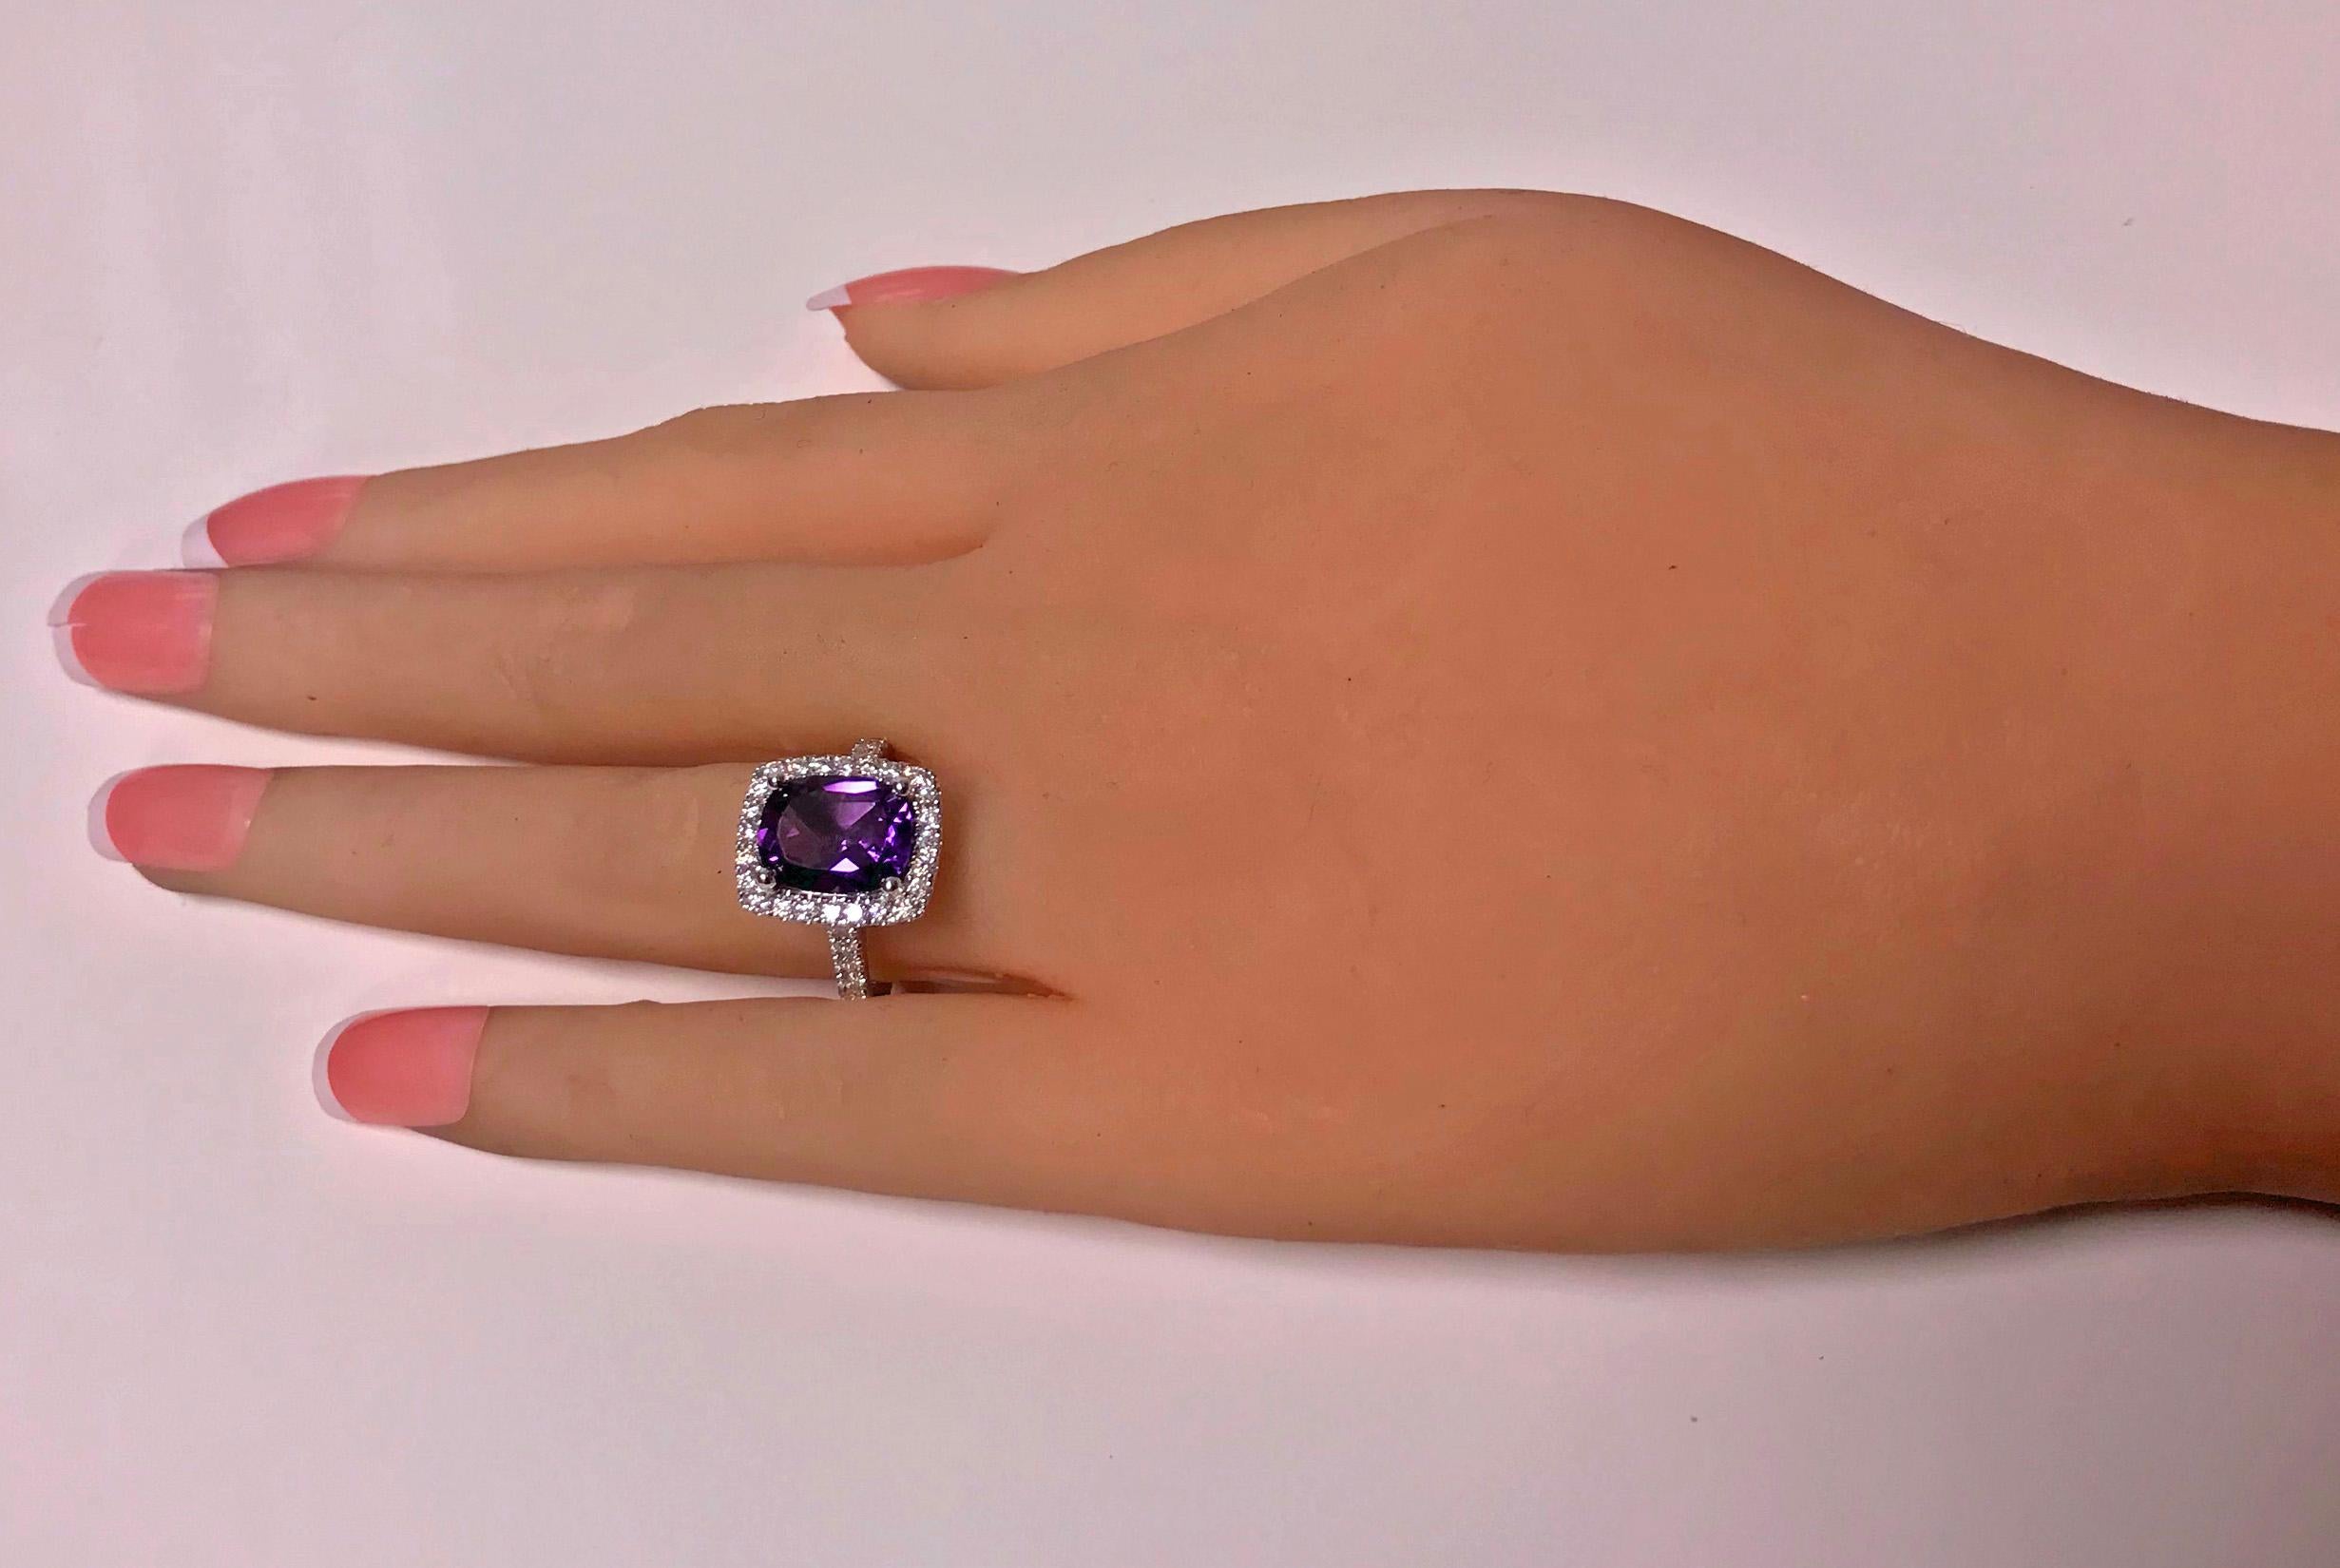 Amethyst and Diamond Ring, 14K white gold. The Ring claw set with a fine medium, moderately strong  purple rectangular cushion cut Amethyst, gauging approximately 10.00 x 8.00 x 5.00 mm, approximately 2.50 cts, the mount and shoulders set with a